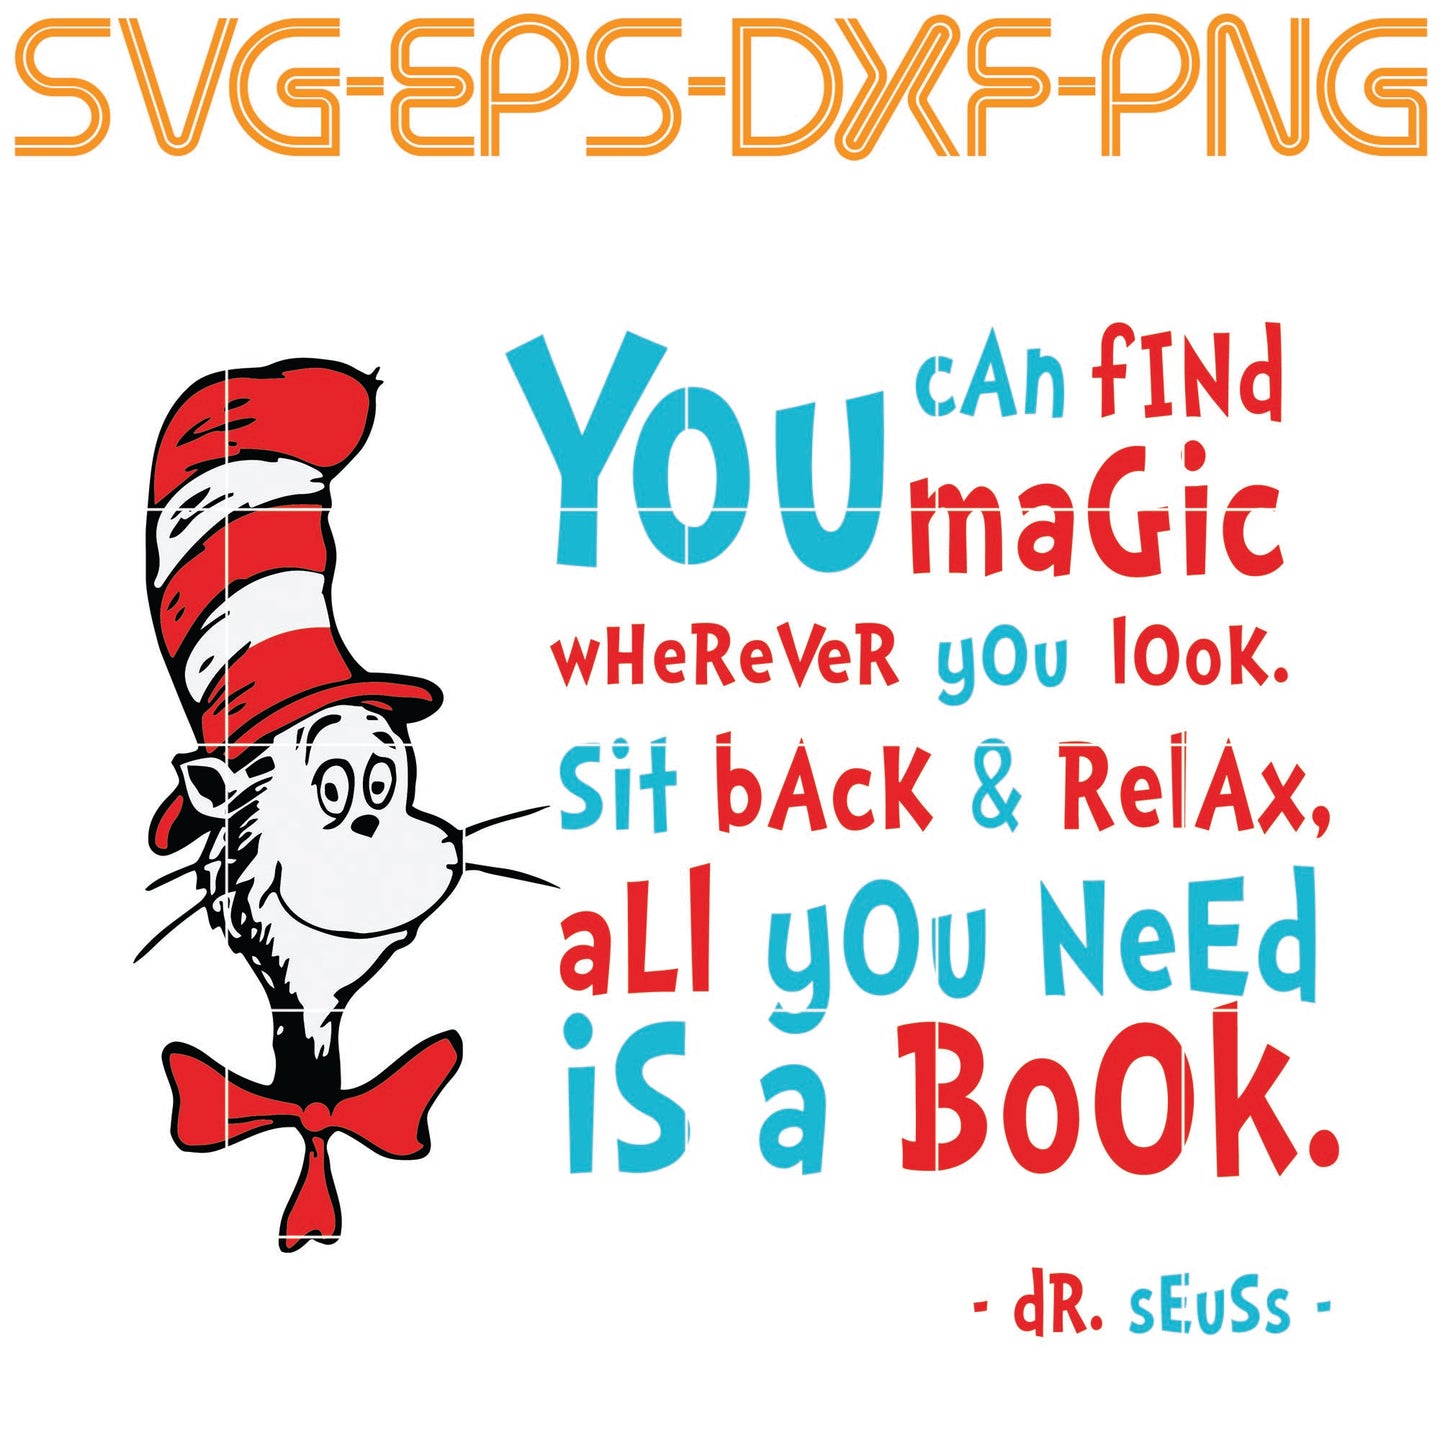 Download Dr Seuss Dr Seuss Svg You Can Find Magic Cat In The Hat Cat Svg Sumosvg